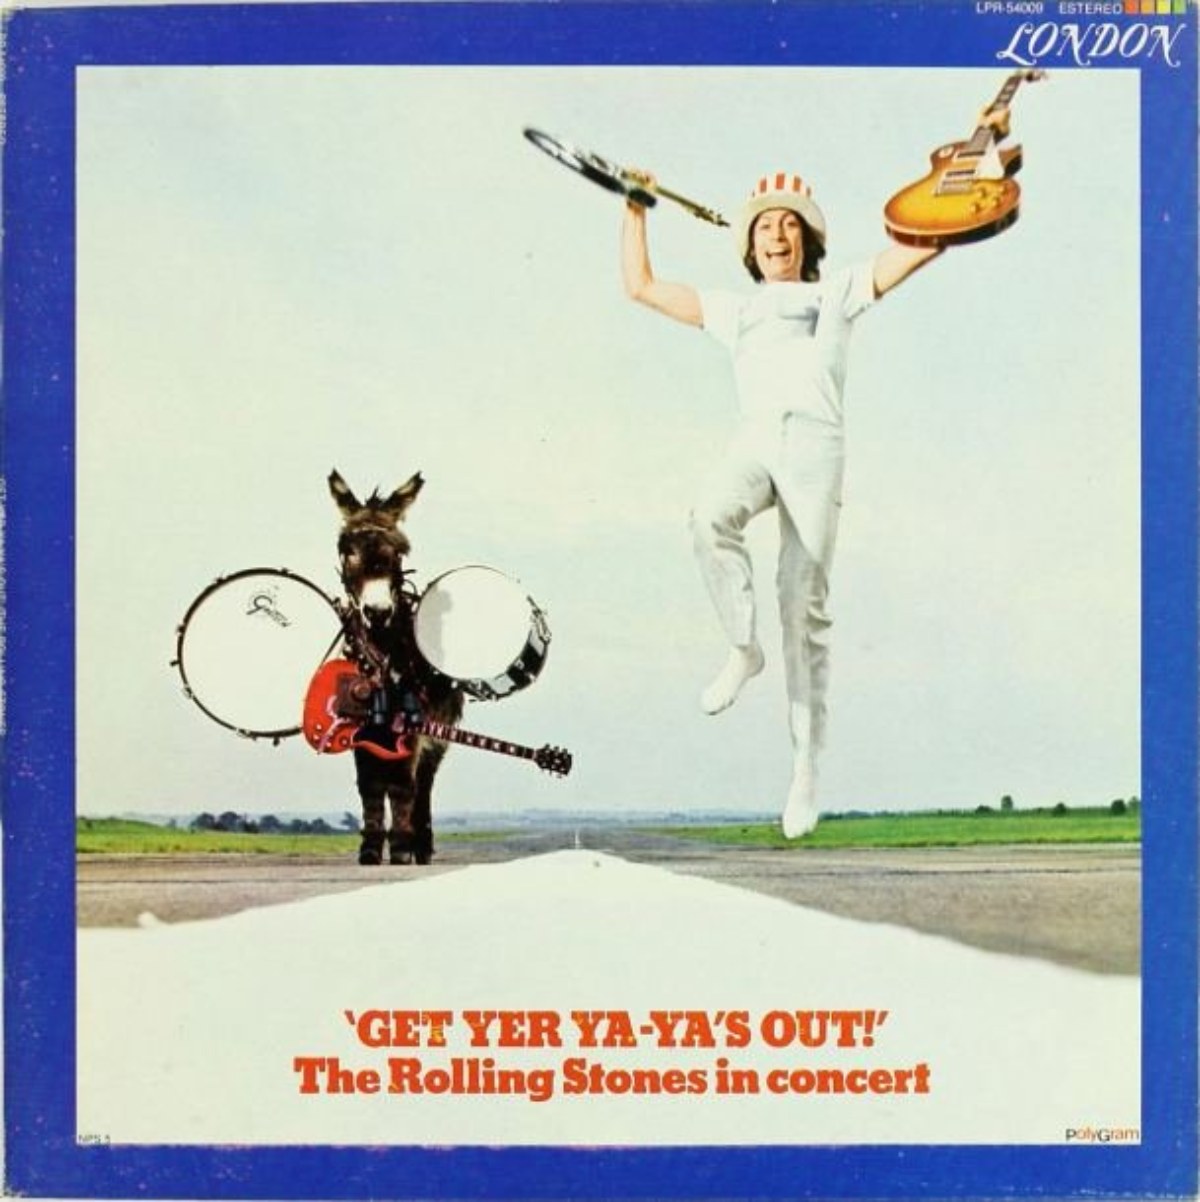 The Rolling Stones - Get Yer Ya-Ya's Out! (1970)